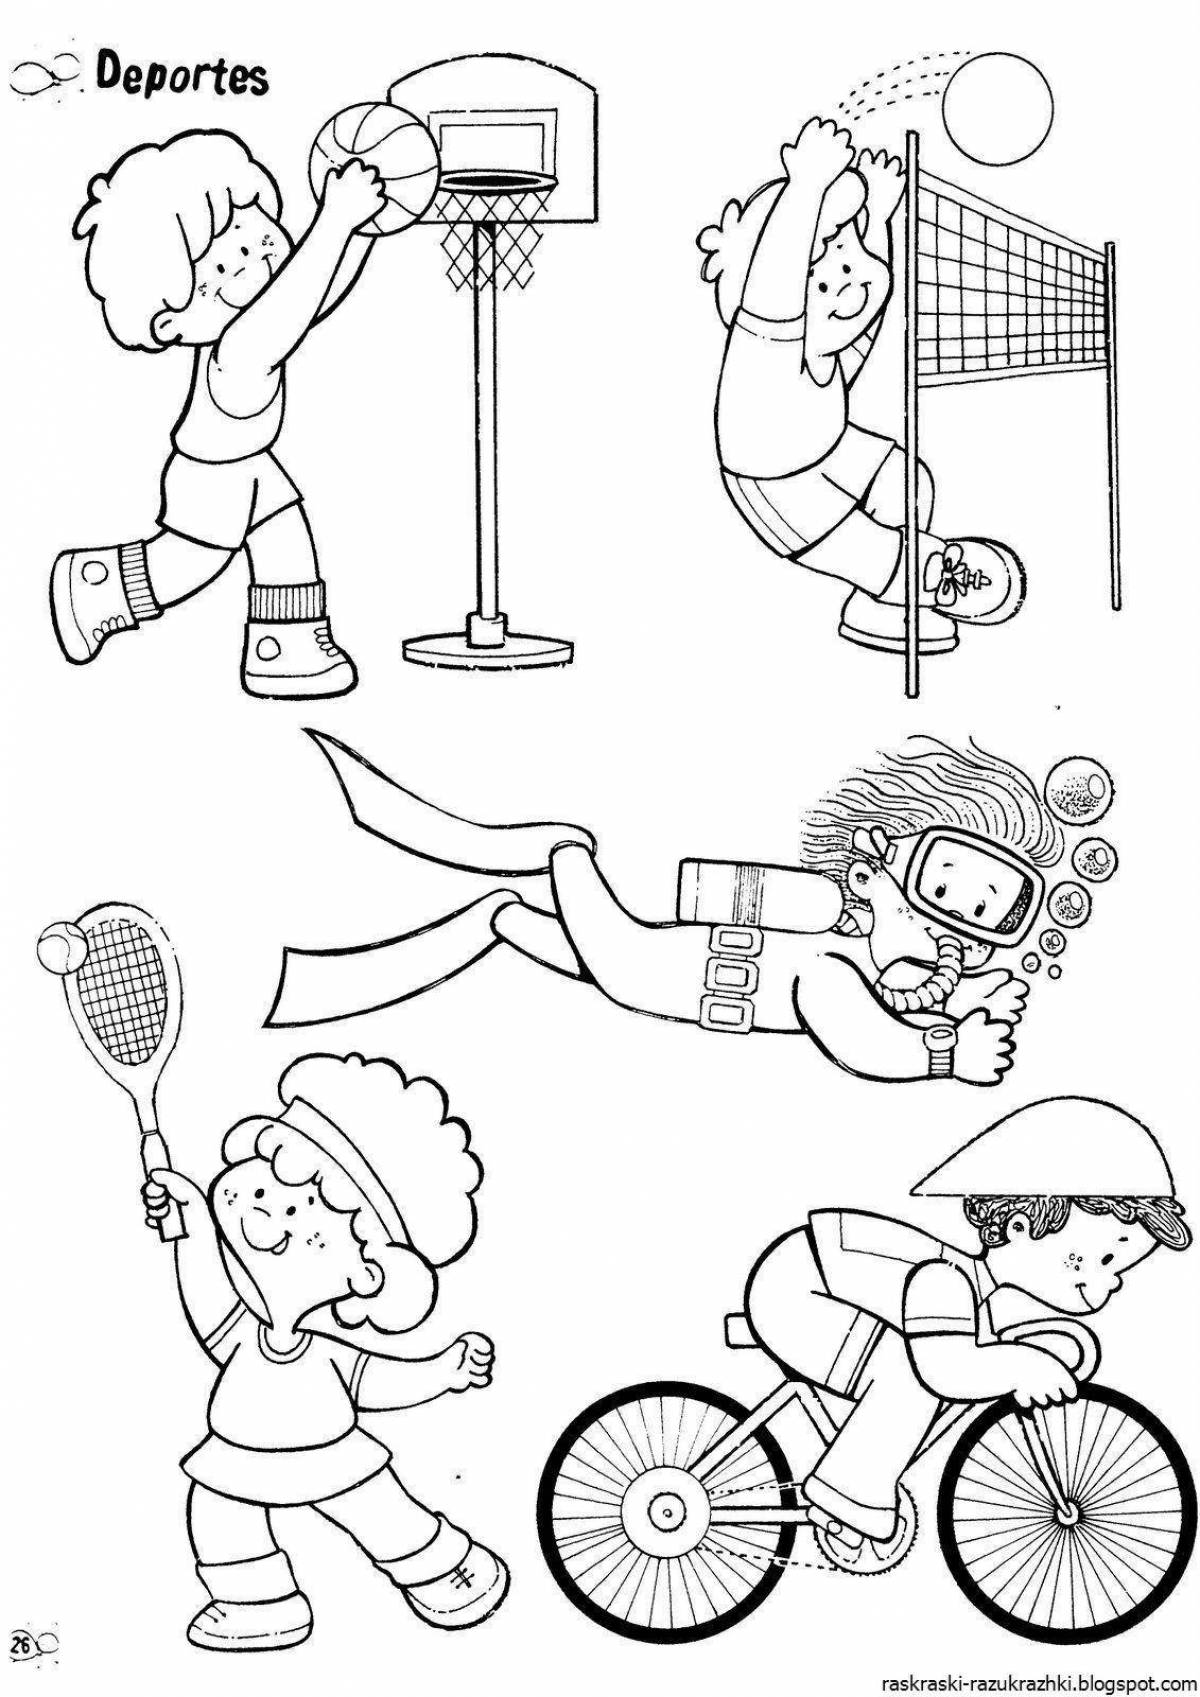 Athletes of different sports for children #5